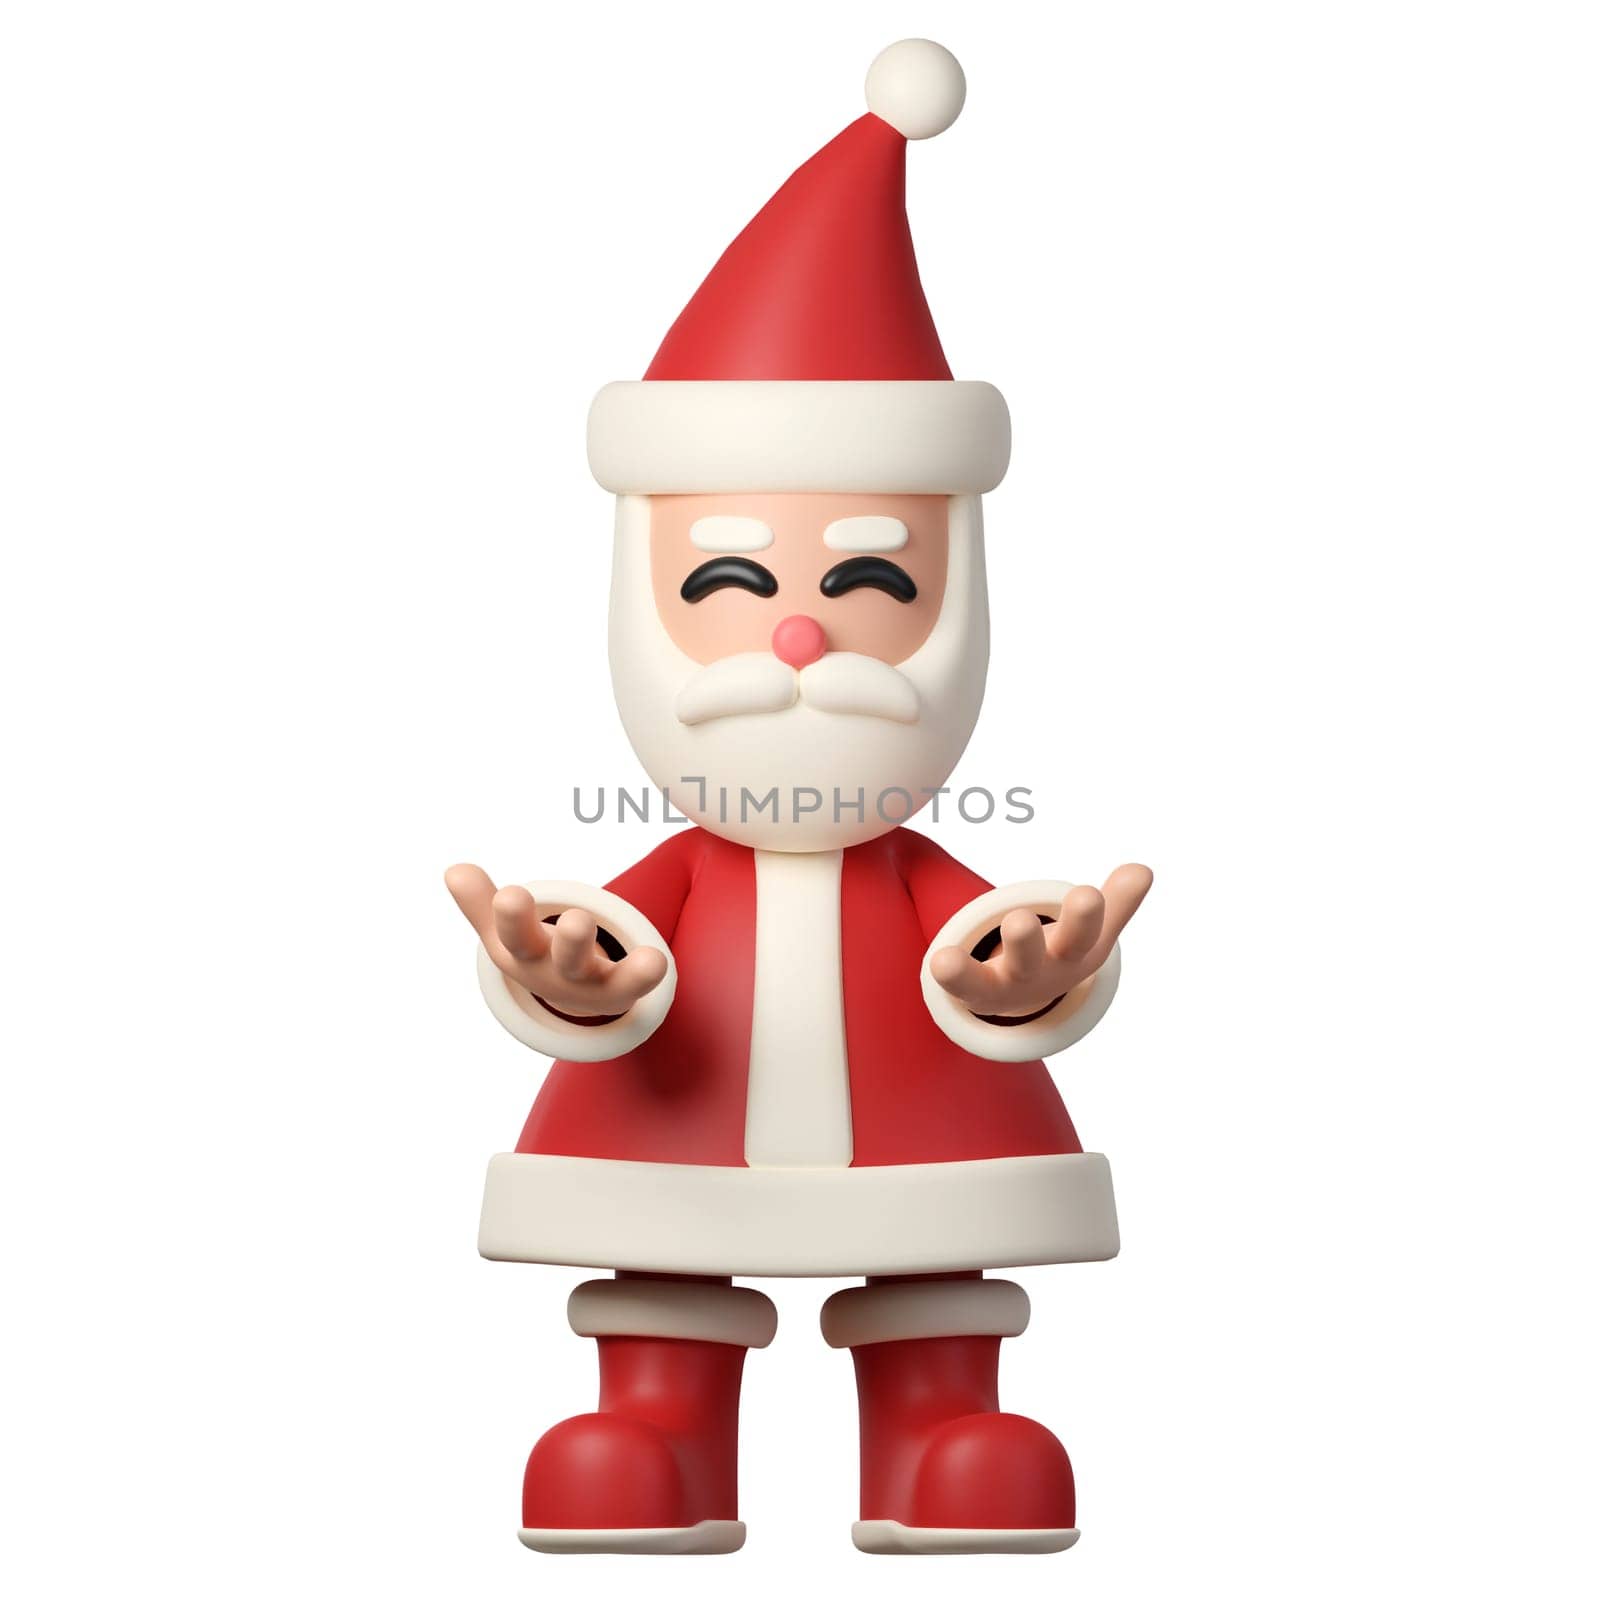 3d Christmas Santa claus icon. minimal decorative festive conical shape tree. New Year's holiday decor. 3d design element In cartoon style. Icon isolated on white background. 3d illustration.